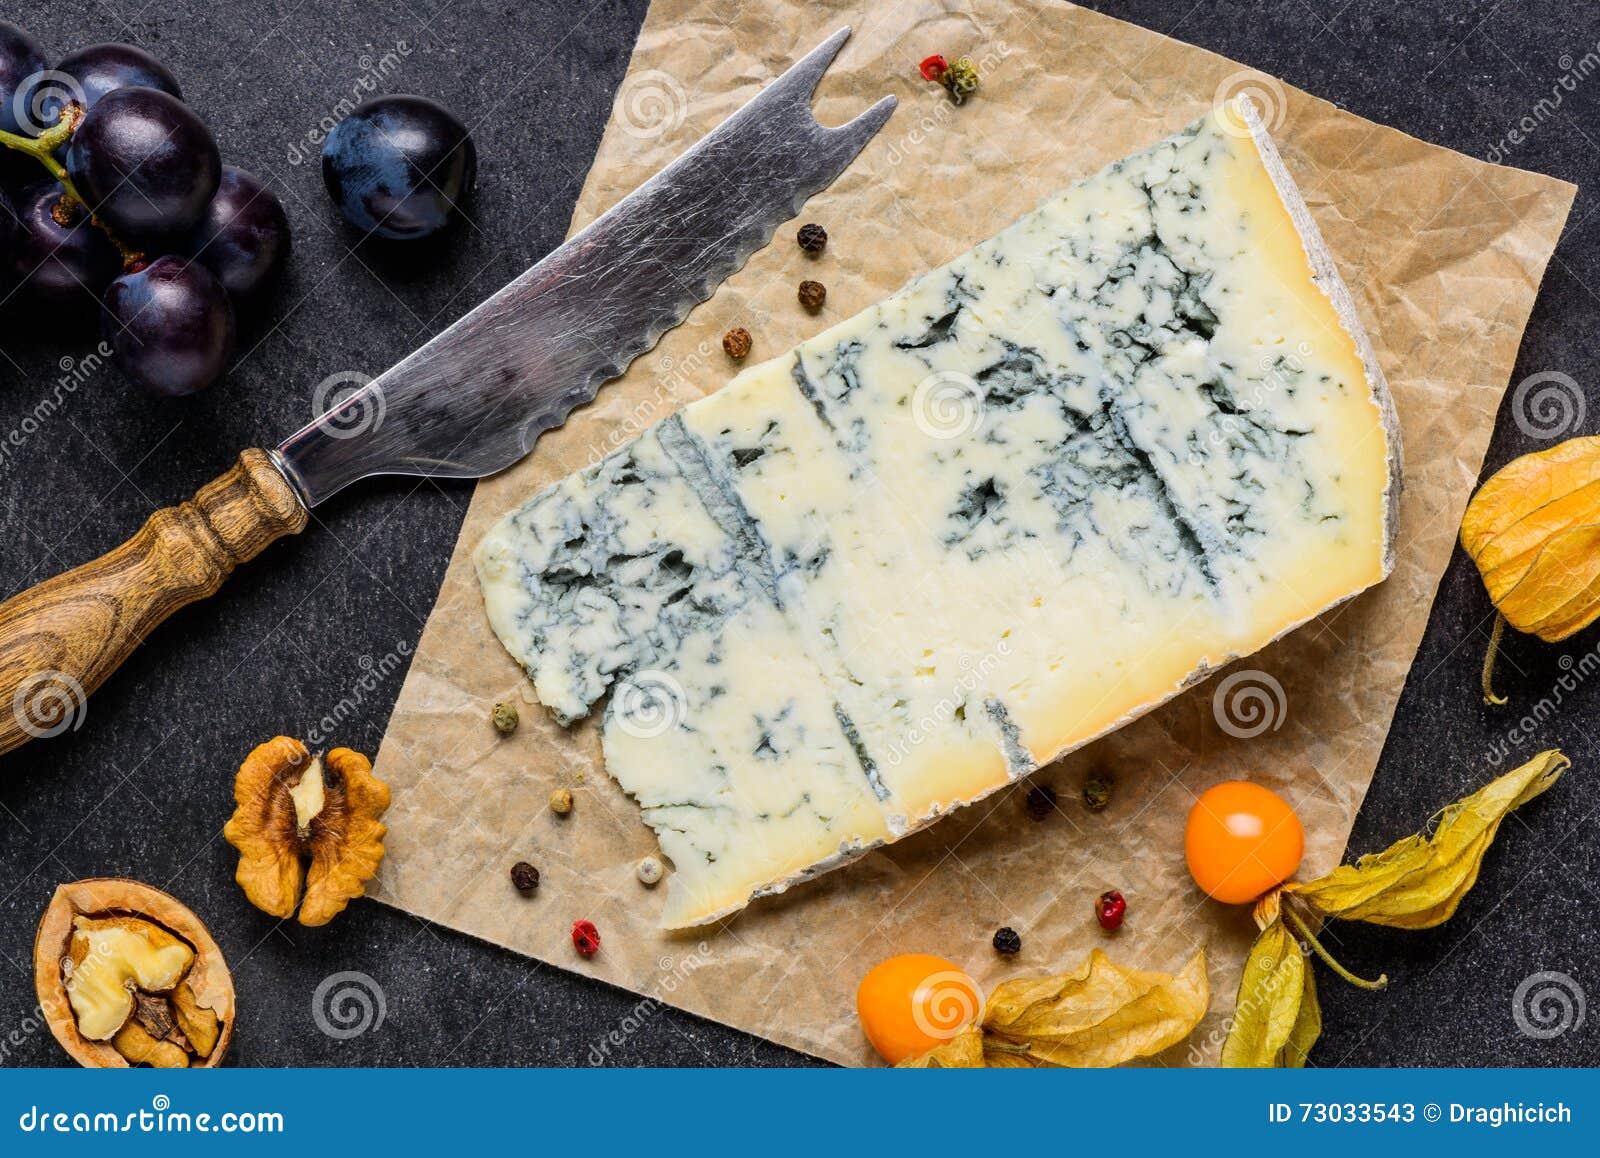 blue mold gorgonzola cheese with fruits